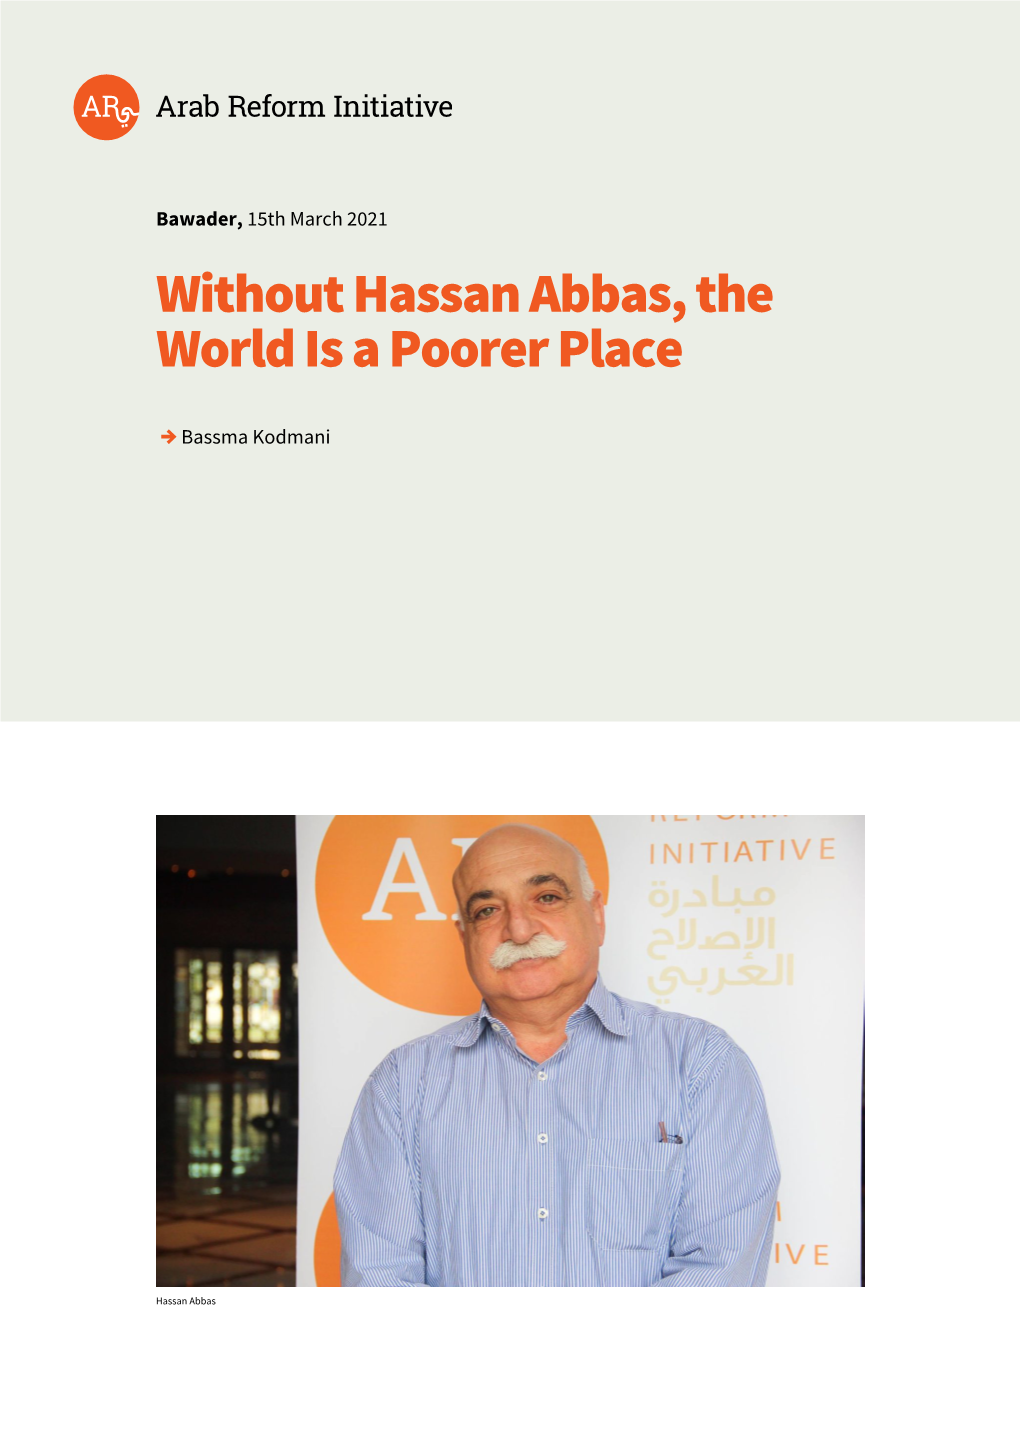 Without Hassan Abbas, the World Is a Poorer Place